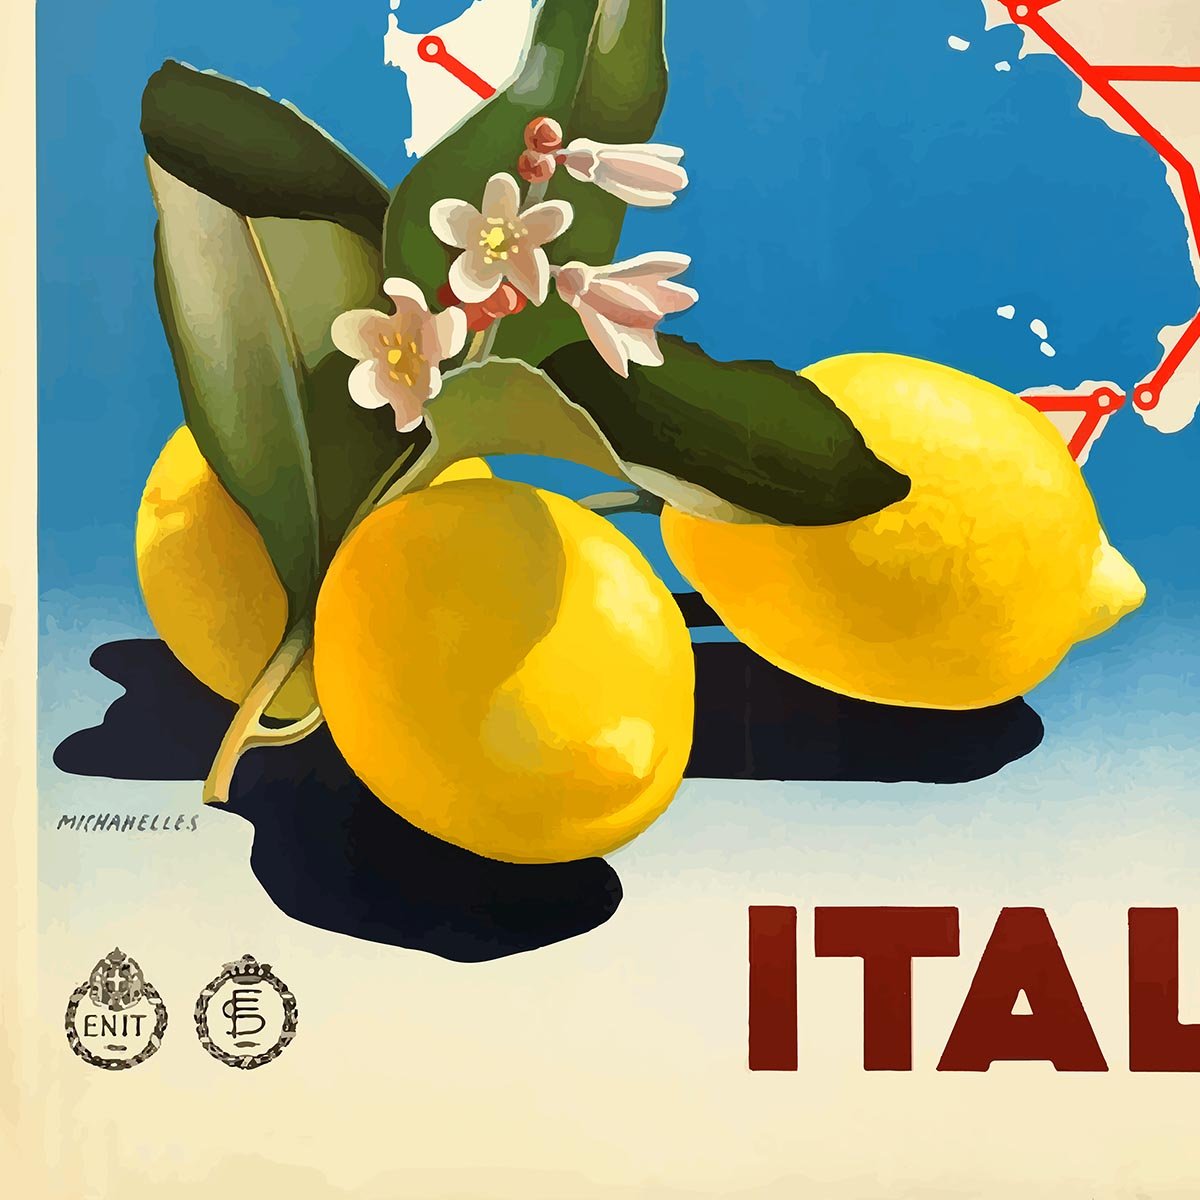 Italy Map Travel Poster